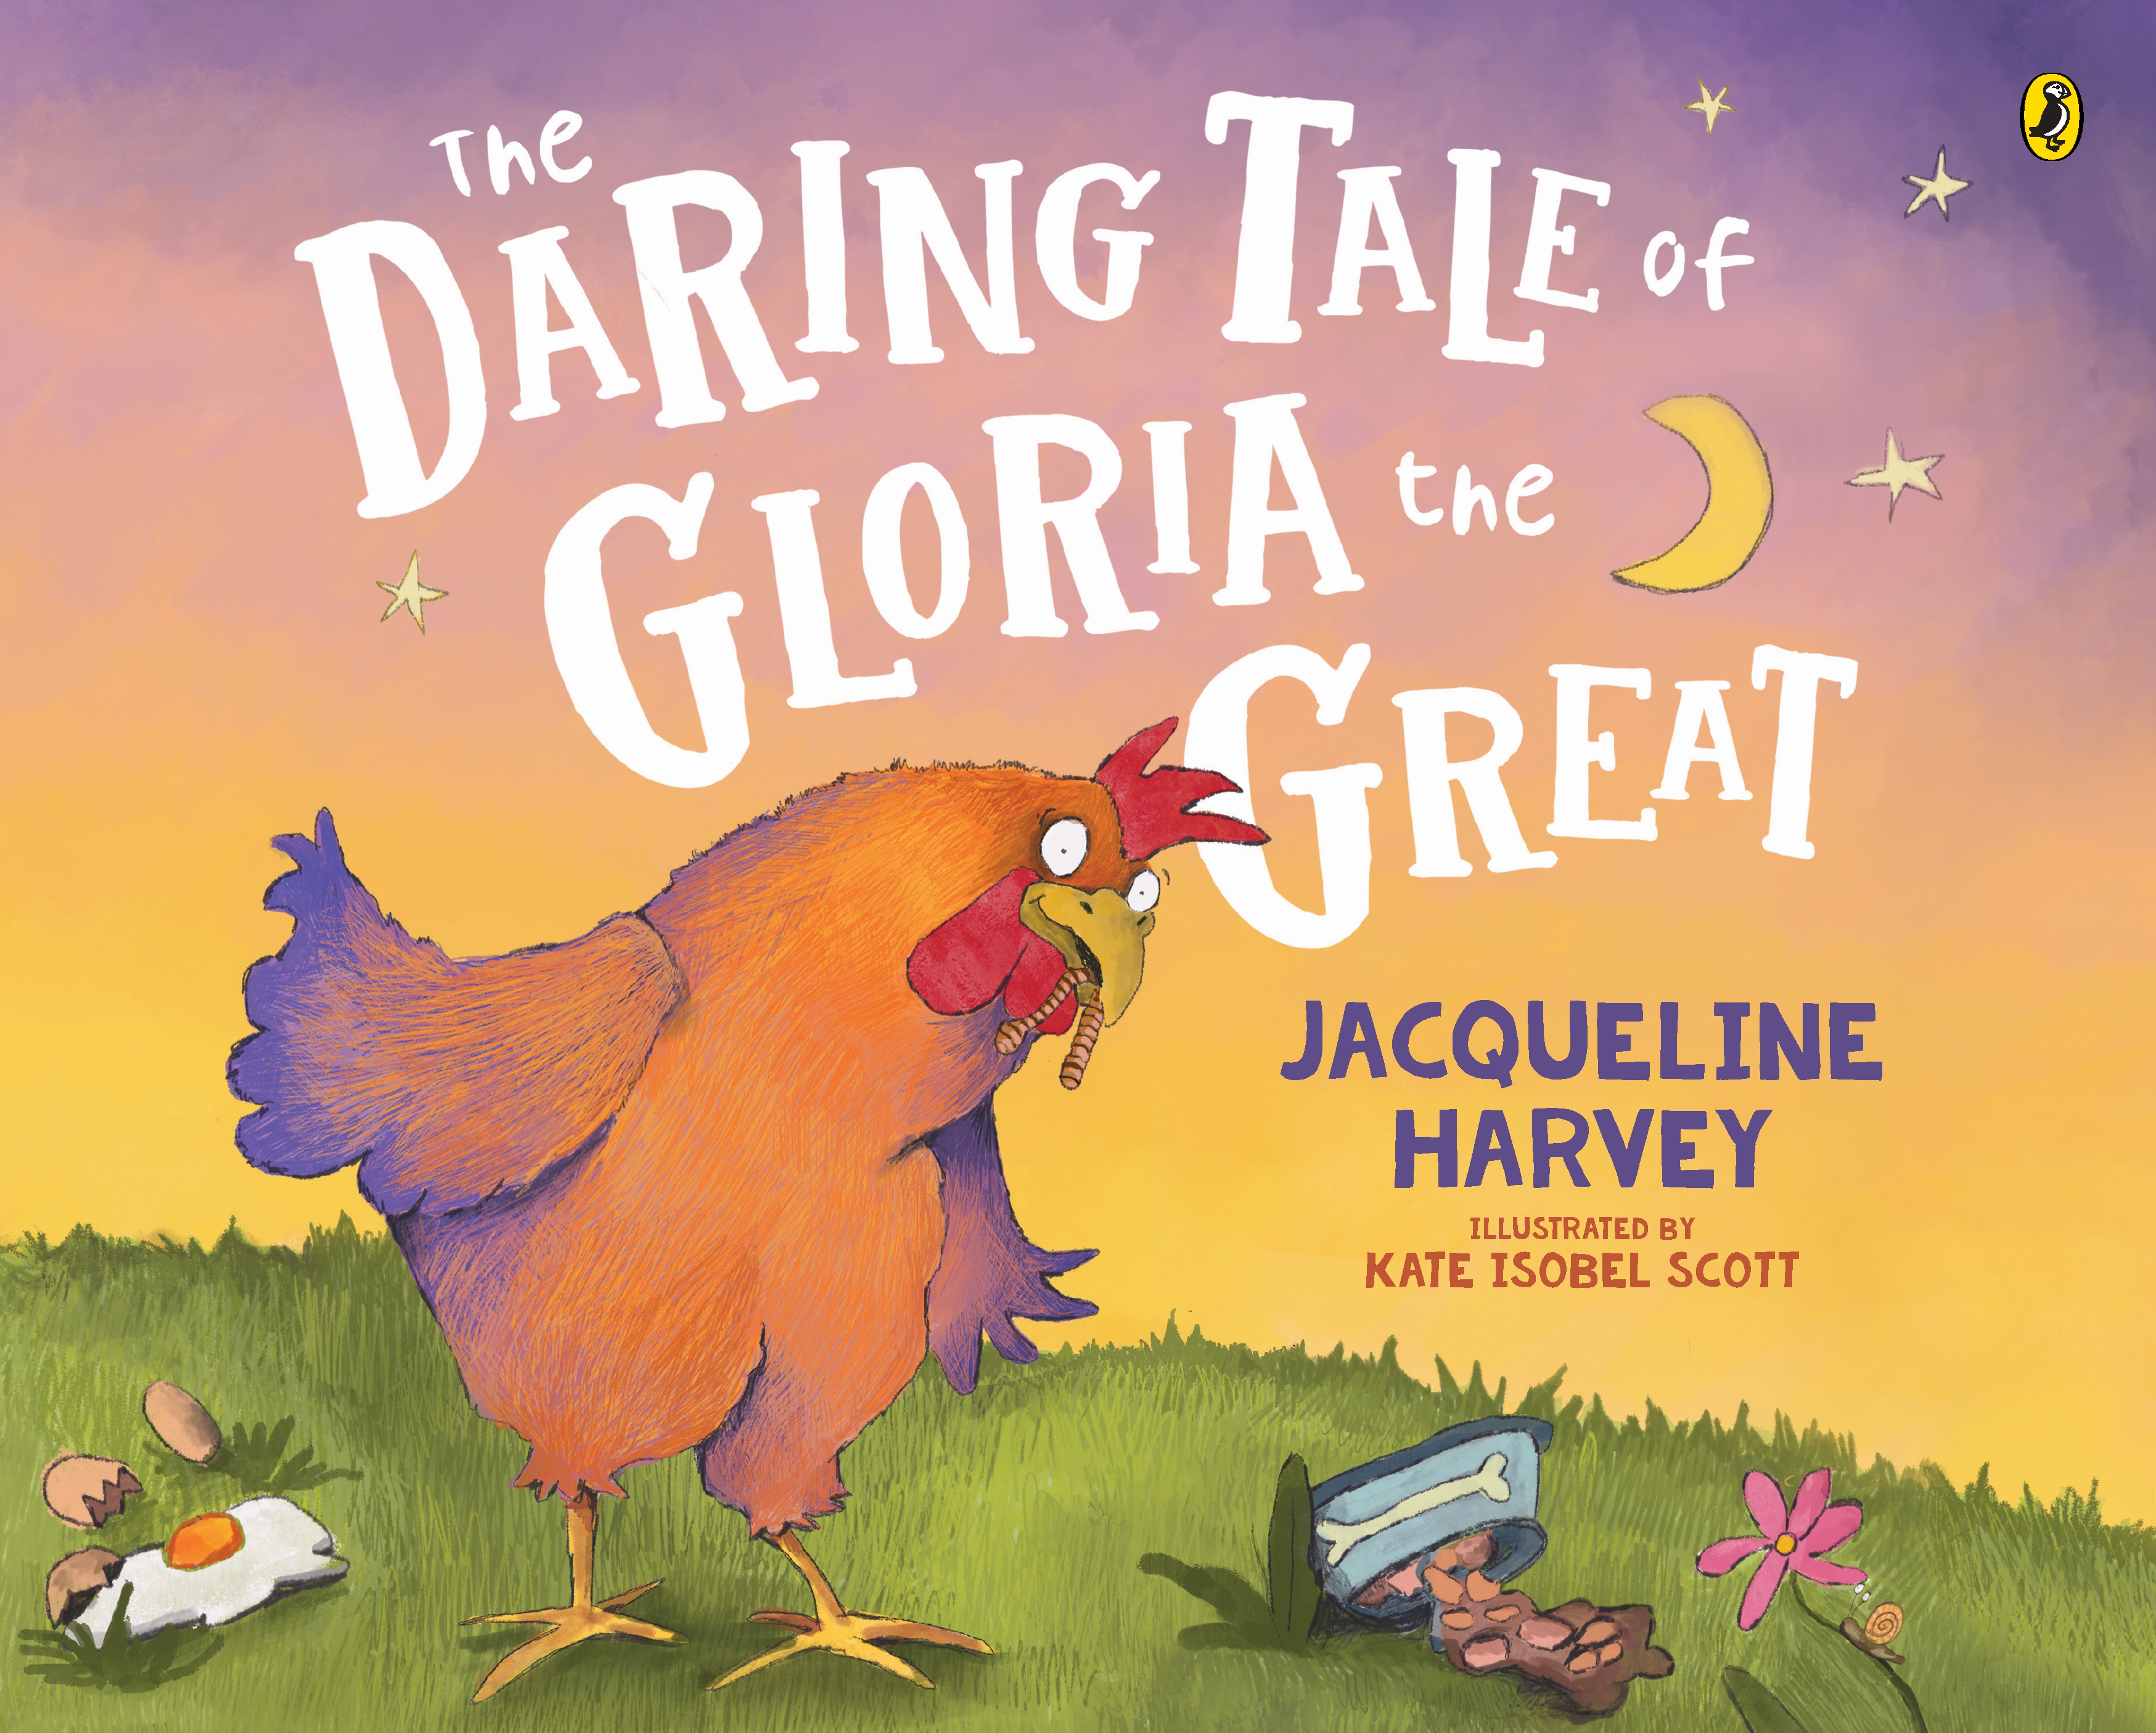 The Daring Tale of Gloria The Great by Jacqueline Harvey